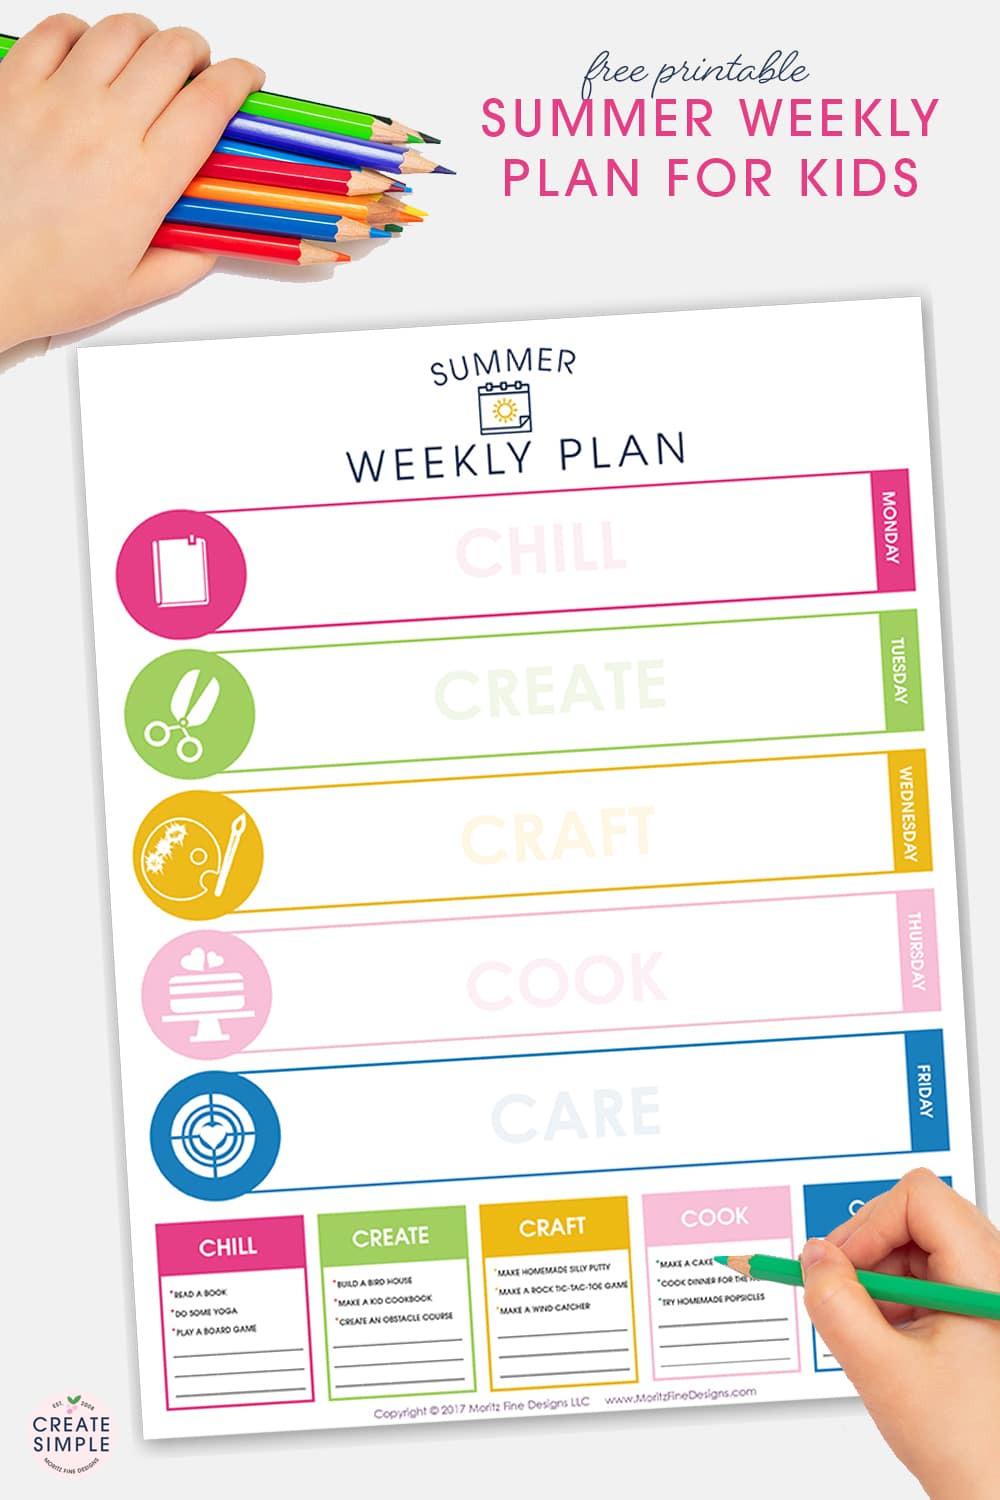 Putting together a Summer Weekly Plan for your kids helps alleviate a lot of headache! With a clear and concrete plan in place mom and kids are happy!